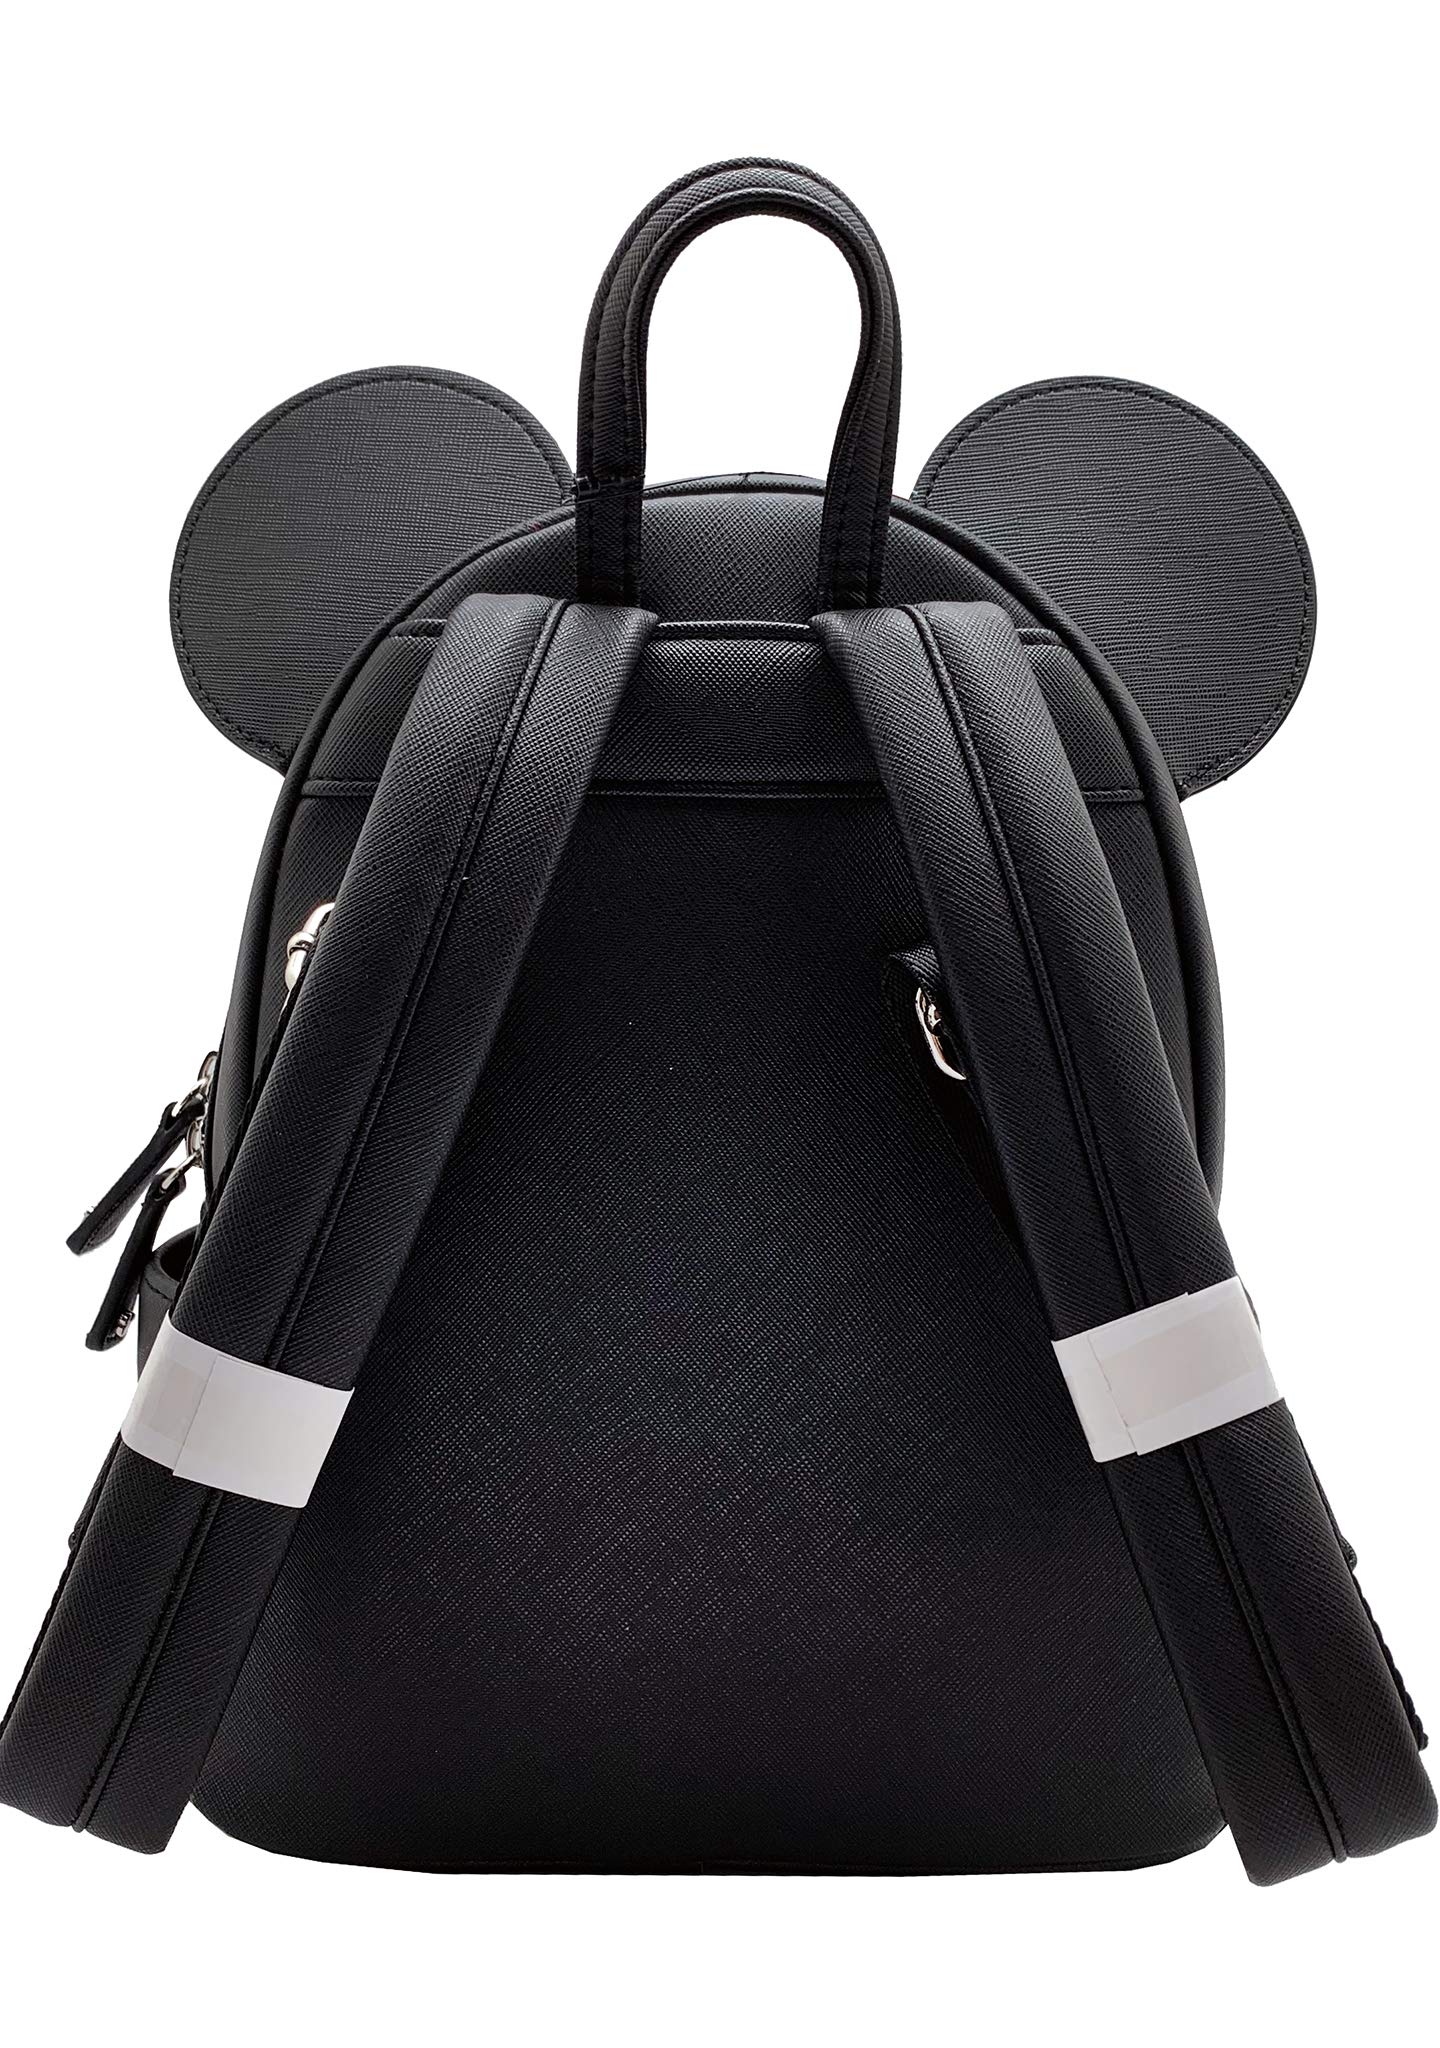 Loungefly X Disney LASR Exclusive Minnie Mouse Dress Mini Backpack